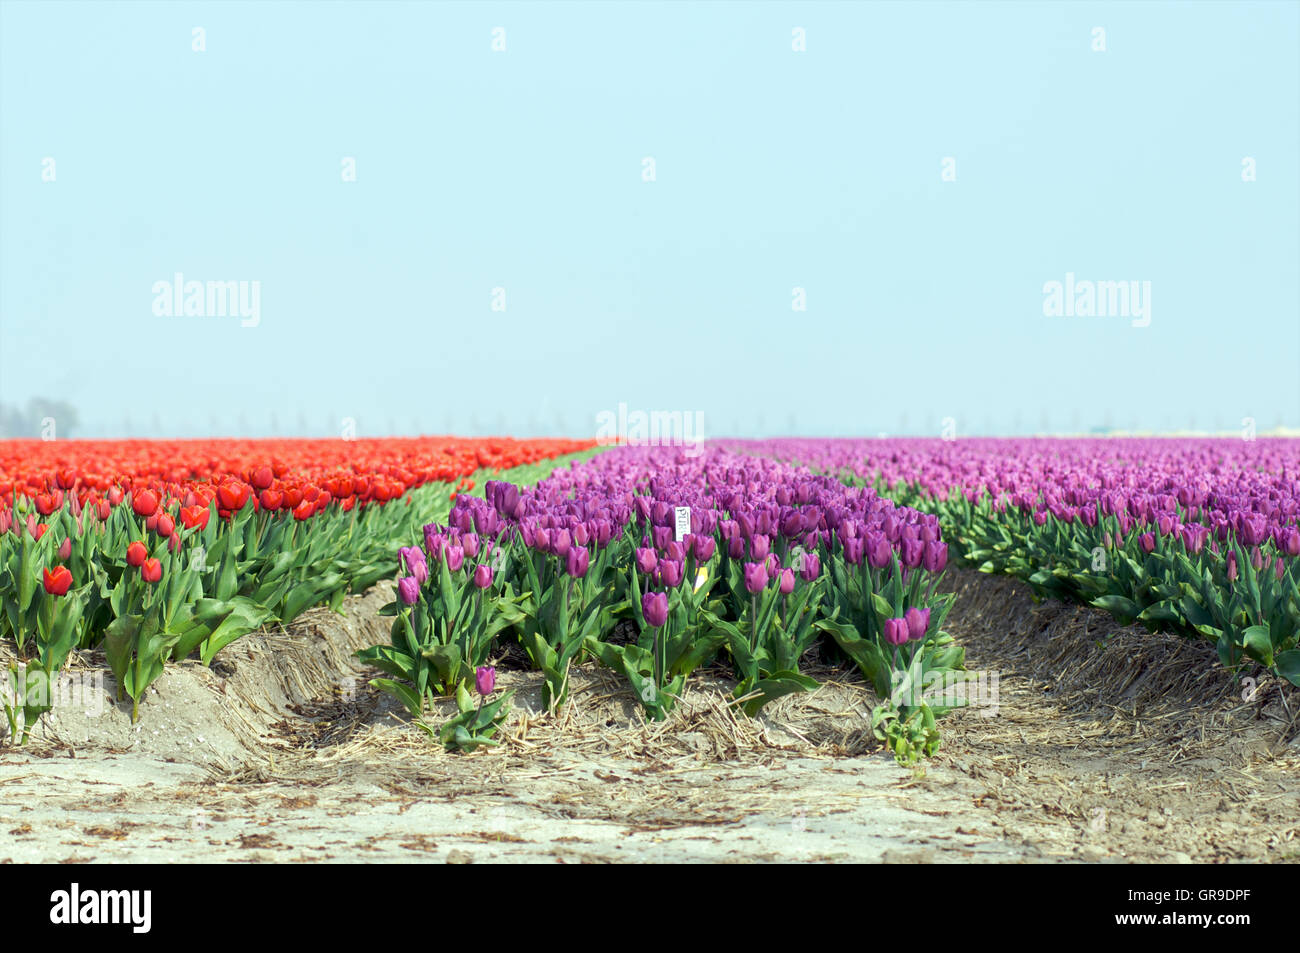 Rows of red and purple tulips in a field in the Netherlands Stock Photo